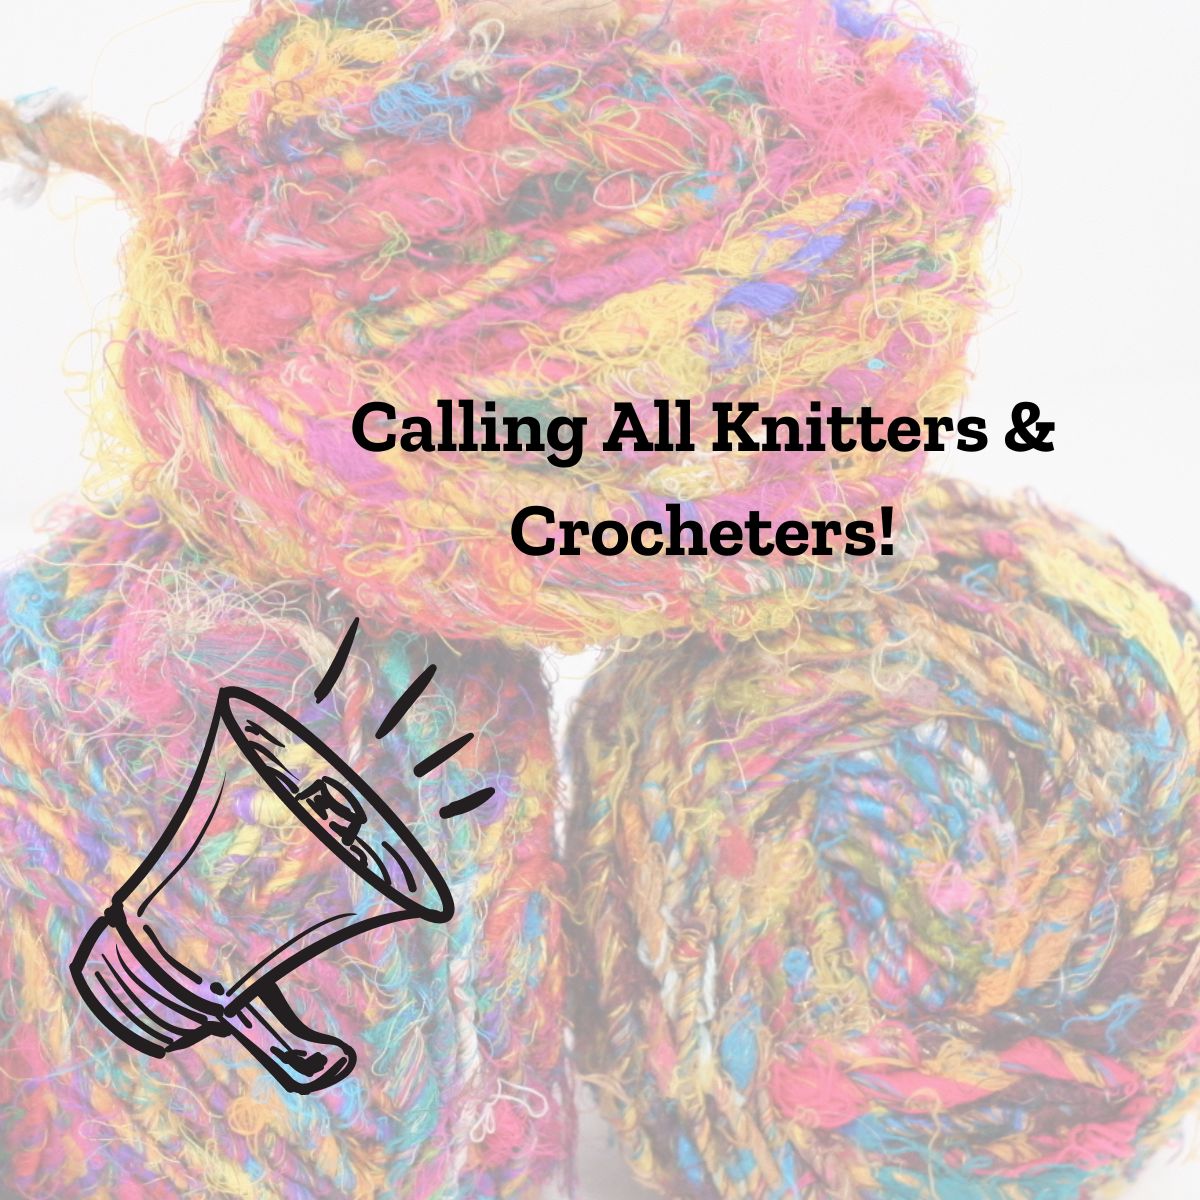 Calling all knitters & crocheters! Here are some charities that need your help! - Darn Good Yarn